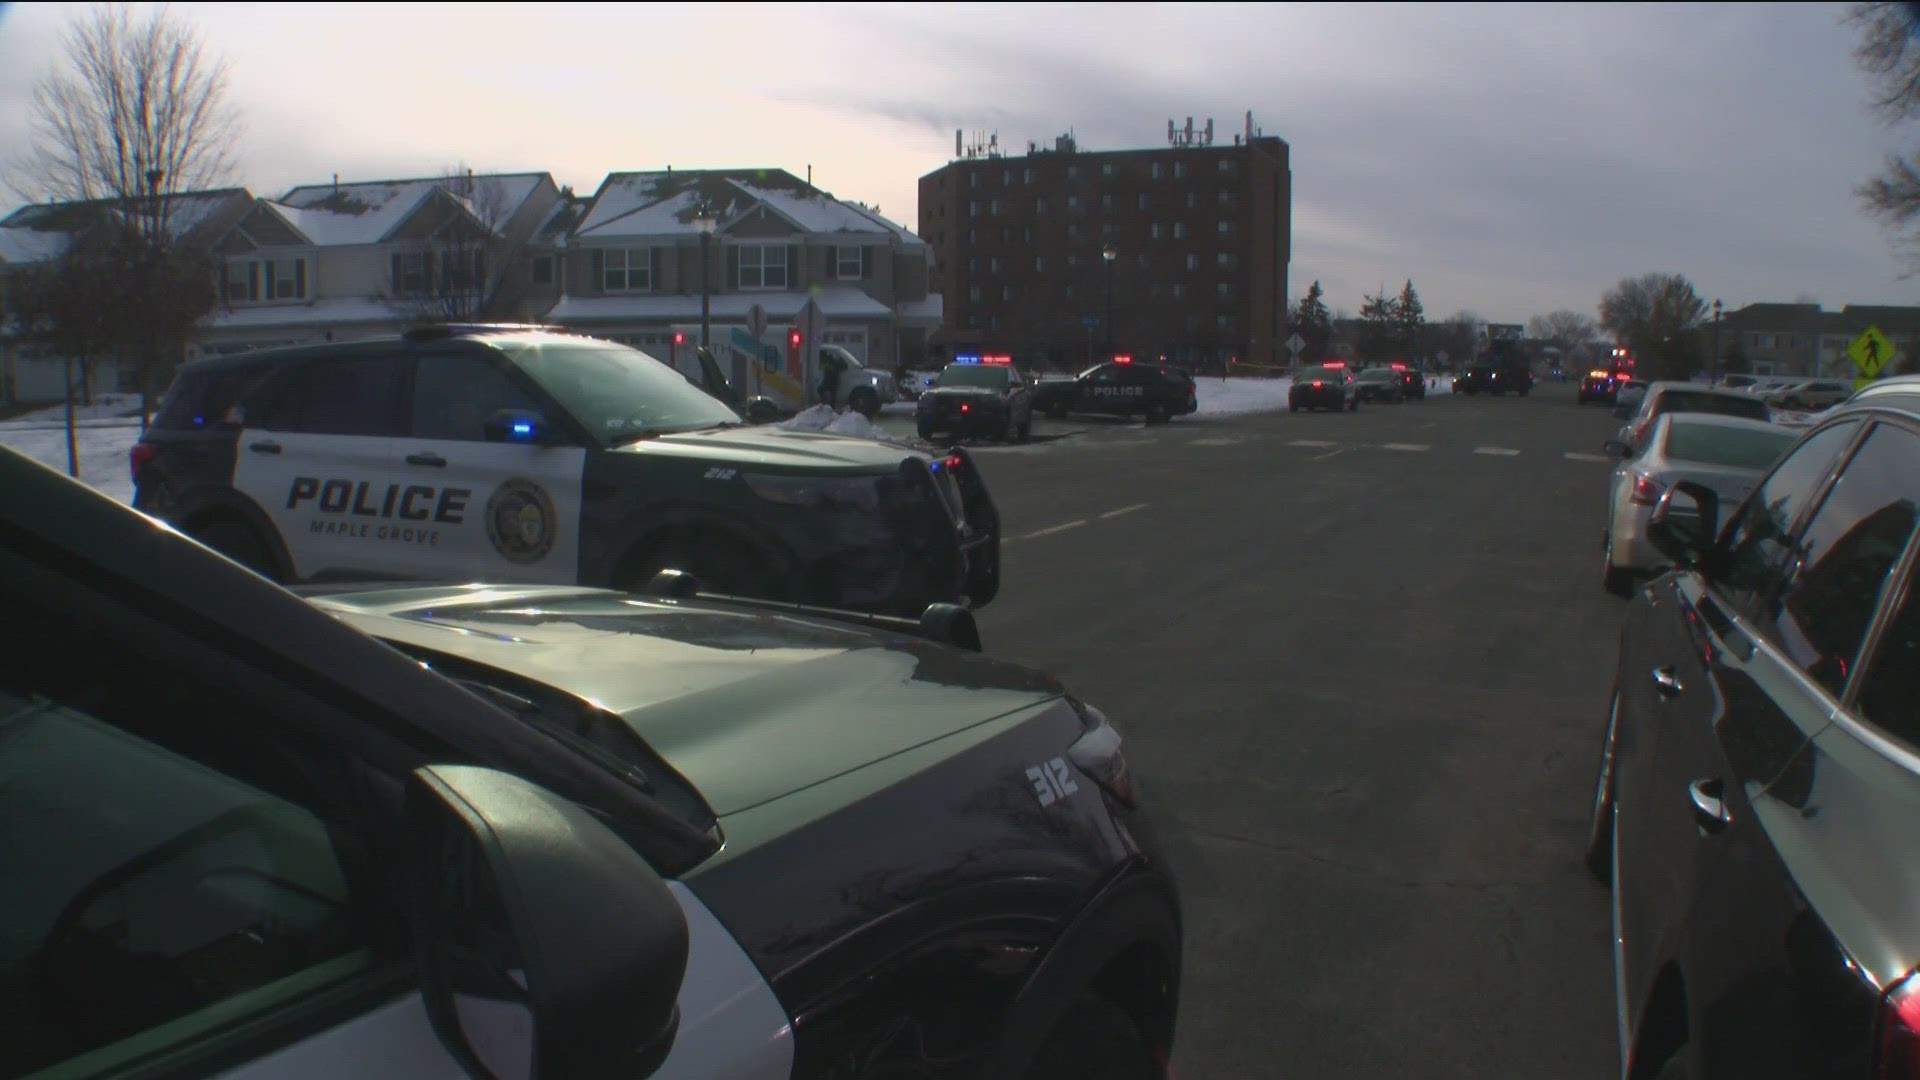 Police found a deceased woman with multiple gunshot wounds inside an apartment complex.